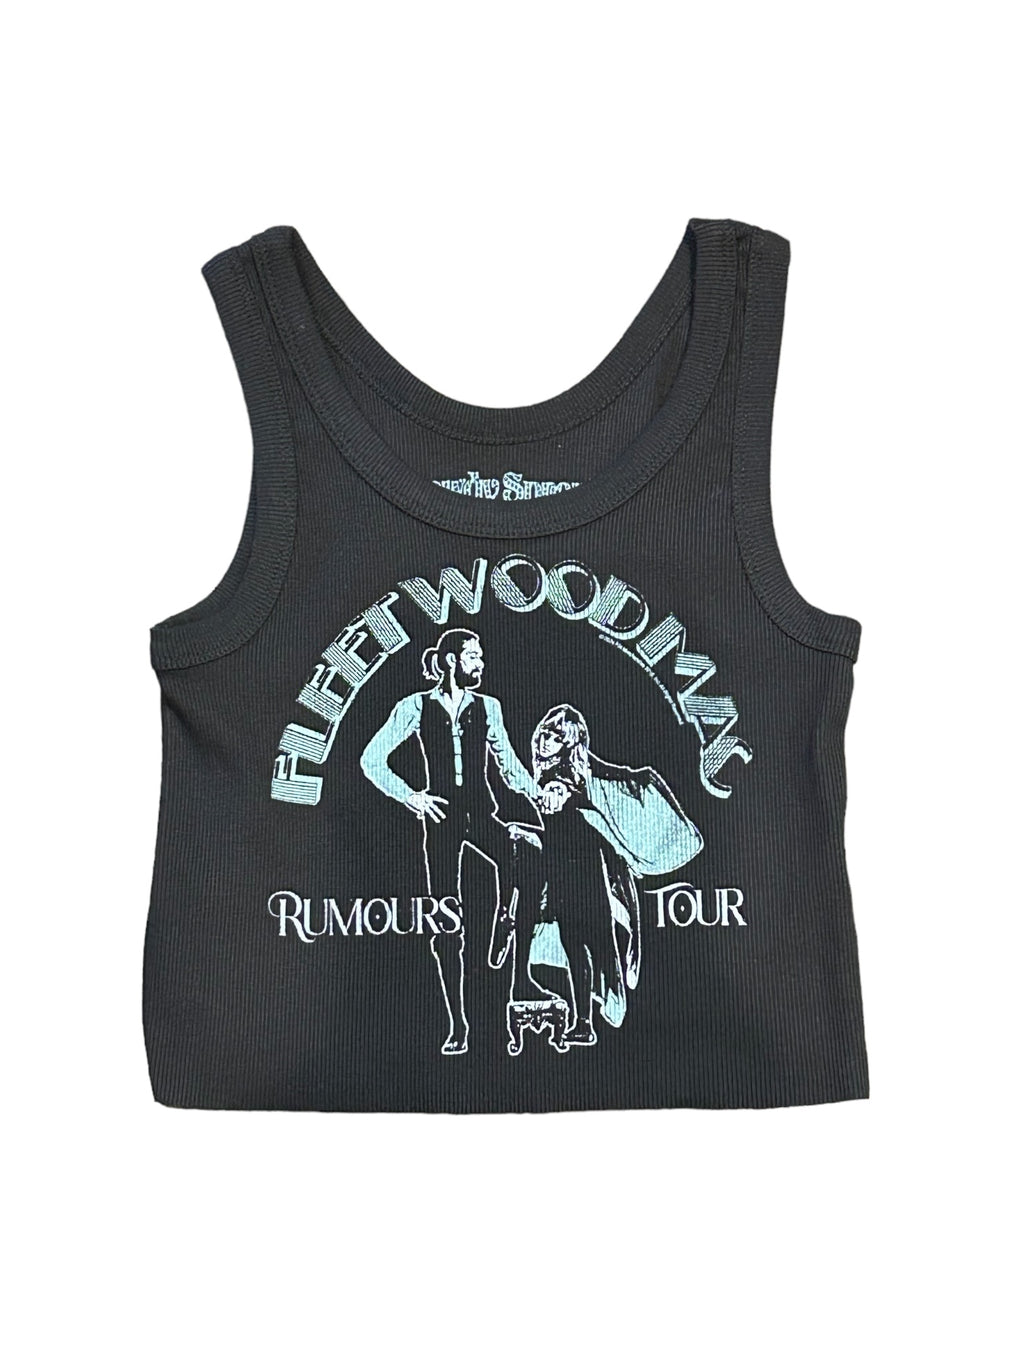 Rowdy Sprout - Fleetwood Mac Thermal Tank Top